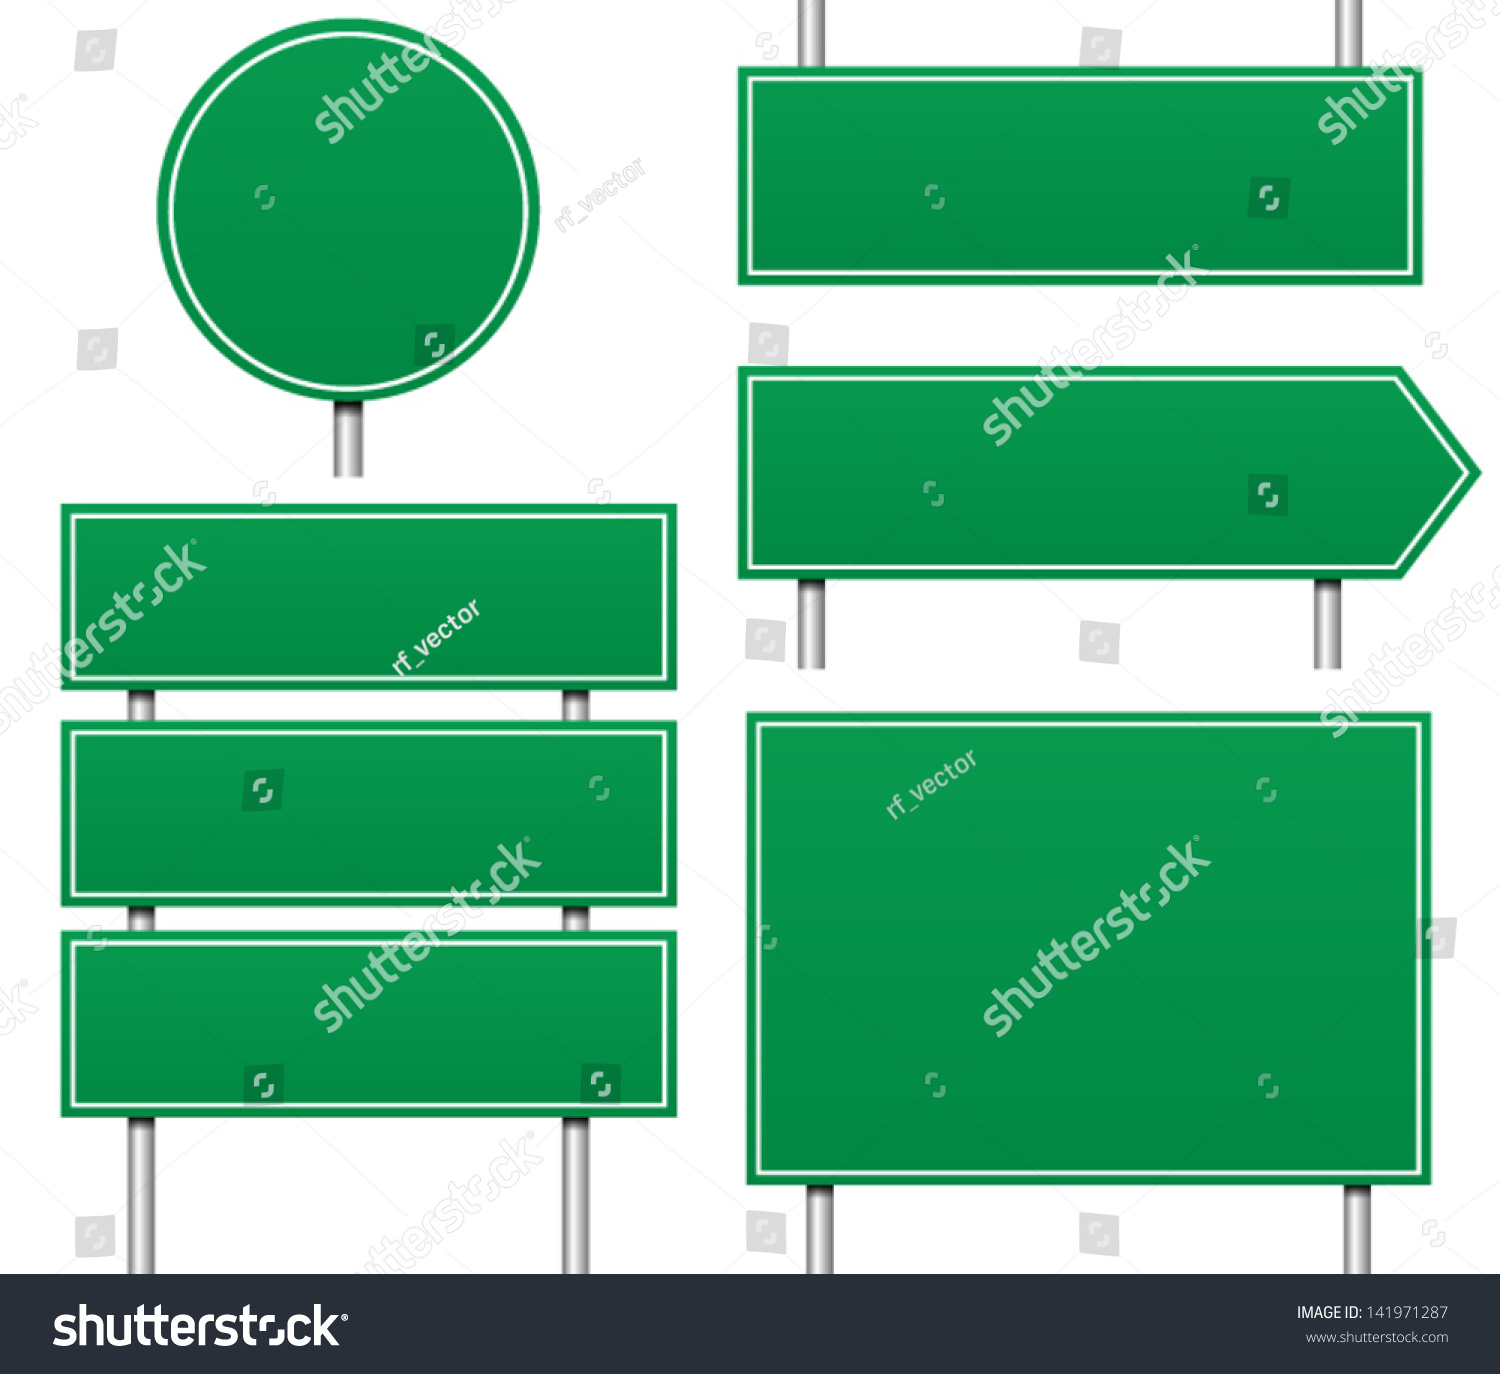 Several Types Empty Blank Road Signs Stock Vector 141971287 - Shutterstock